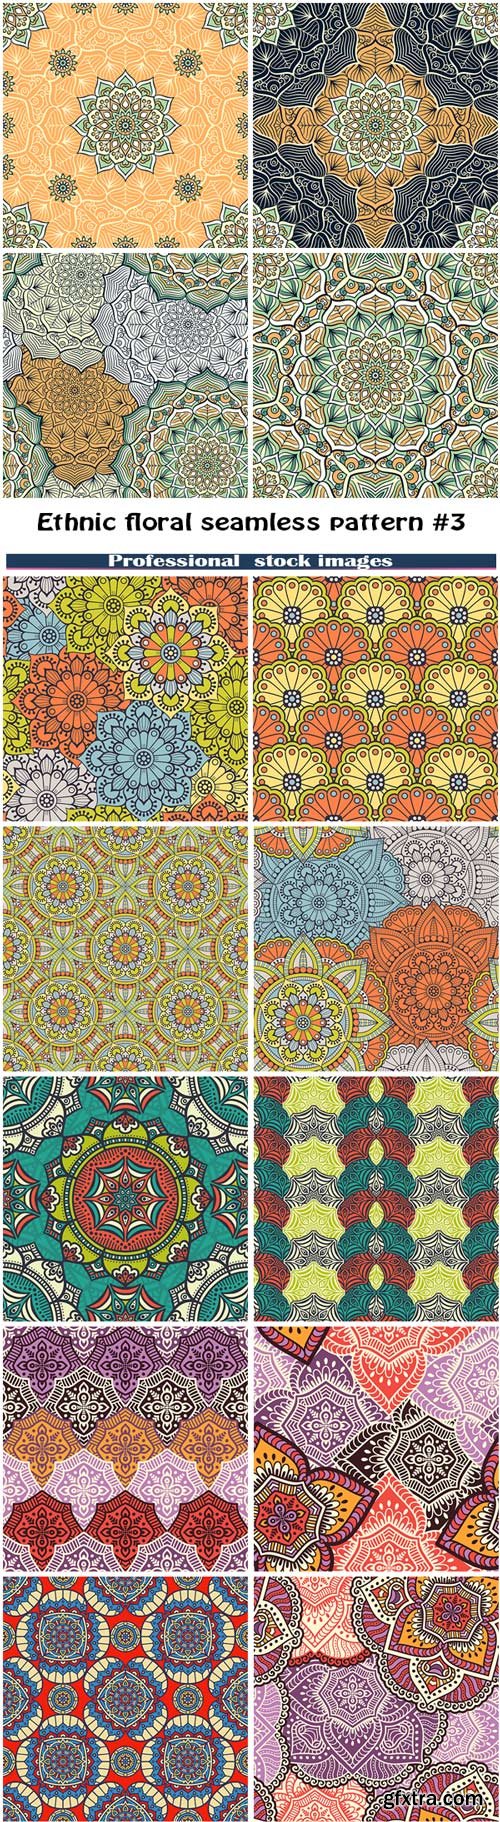 Ethnic floral seamless pattern #3